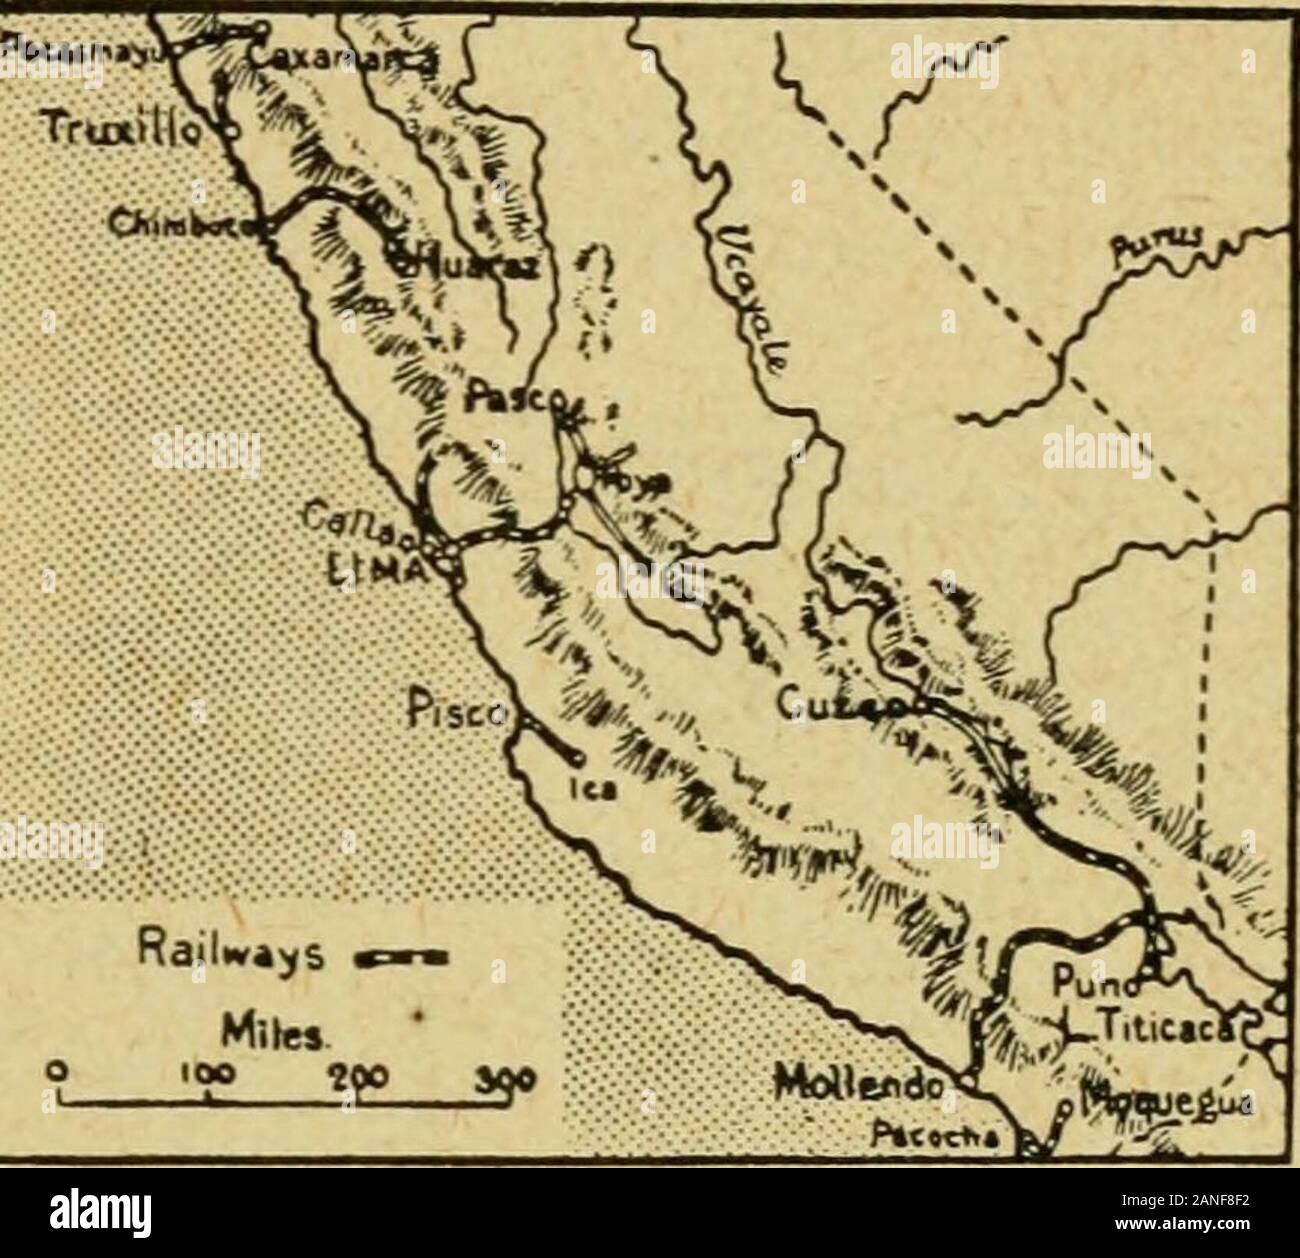 The international geography . ruvianterritory, are navigable by steamers for 740 miles. Coast Departments and Towns.—Peru is divided into eighteendepartments, of which eight are on the coast, eight in the high interiorand two entirely on the navigable eastern rivers. Piura, the most northerndepartment on the coast, has as its capital San Miguel de Piura, founded byPizarro. It is in a fertile valley, and a railway runs to its seaport, Payia.Next, along the coast, comes the new department of Lambayeque, alsowith a railway to the port of Etcn. Libertad contains the old city ofTruxillo, founded by Stock Photo